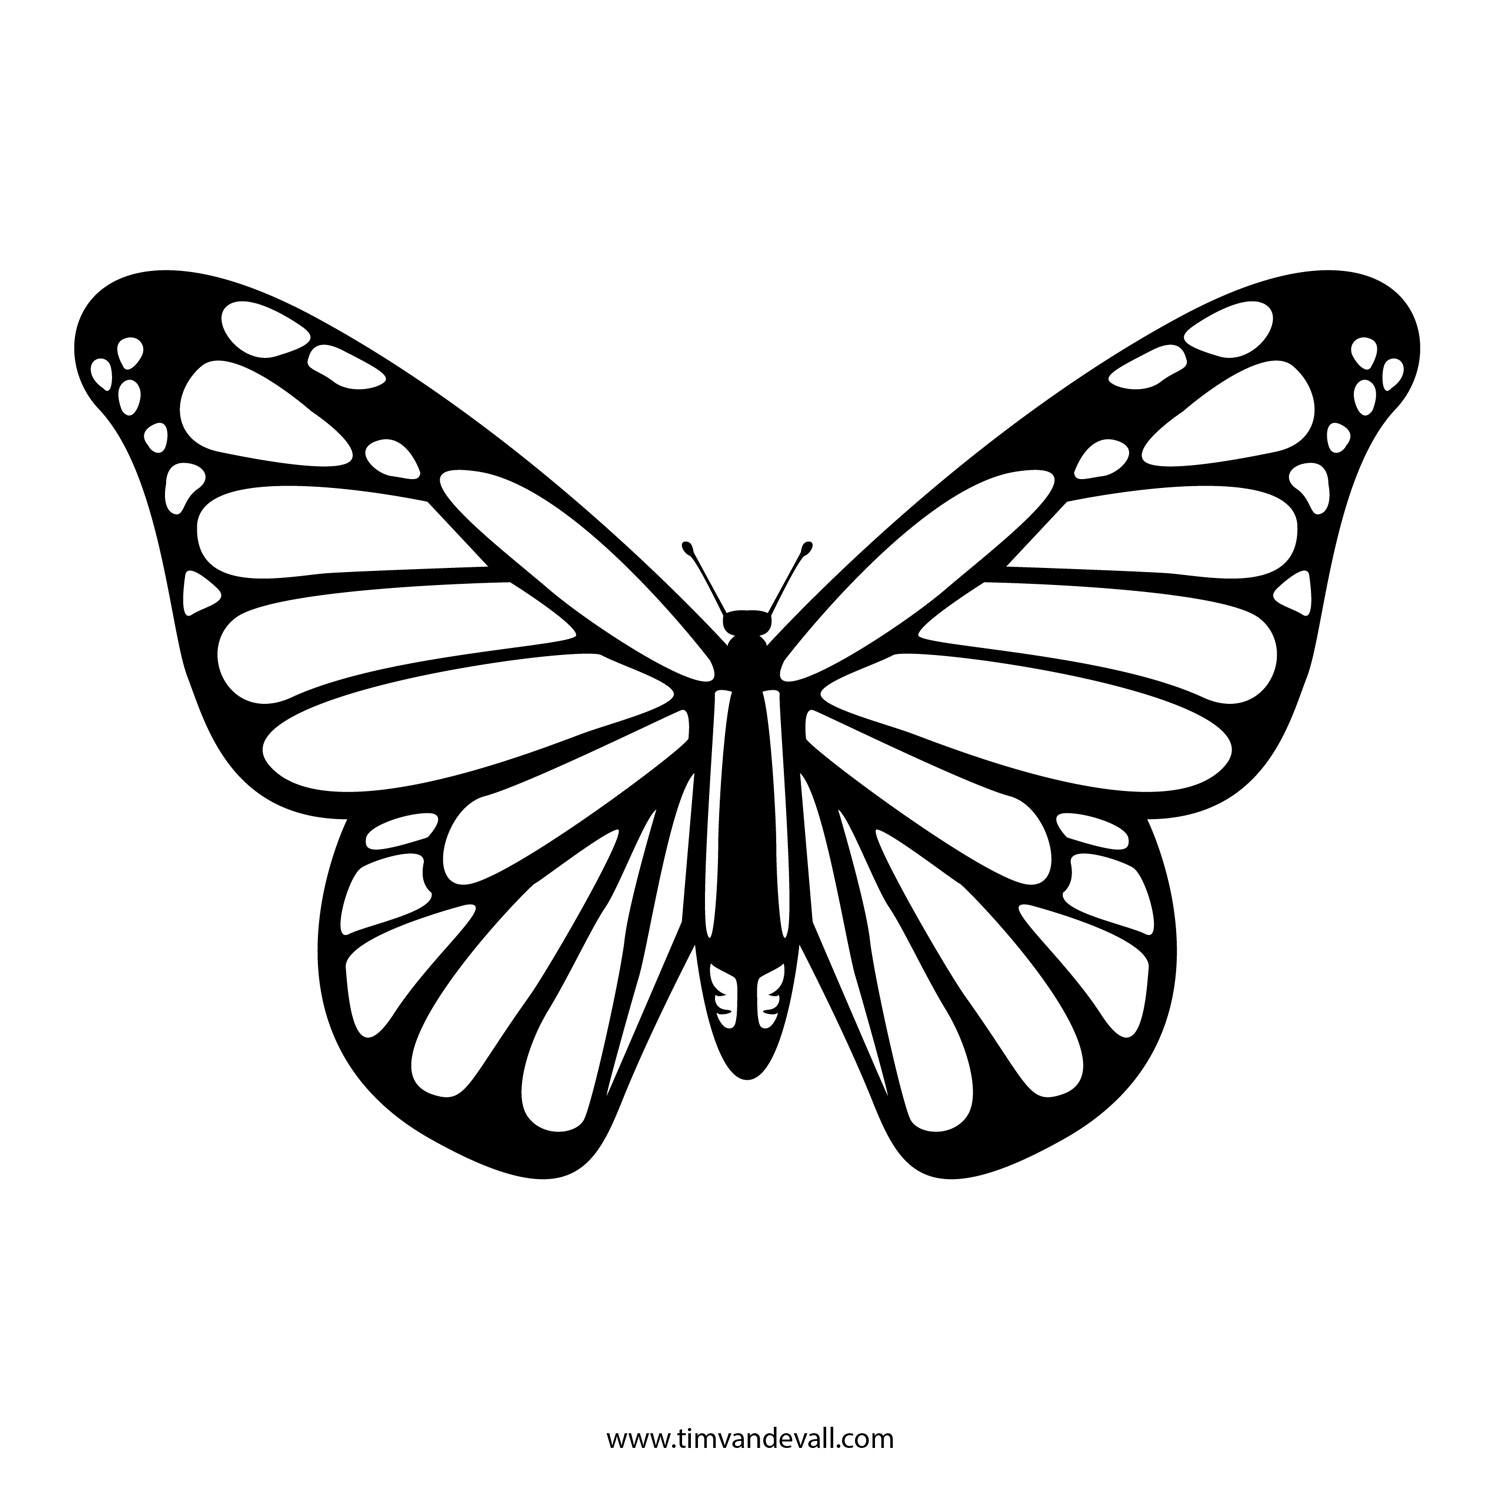 Butterfly black and white monarch butterfly clipart jpeg